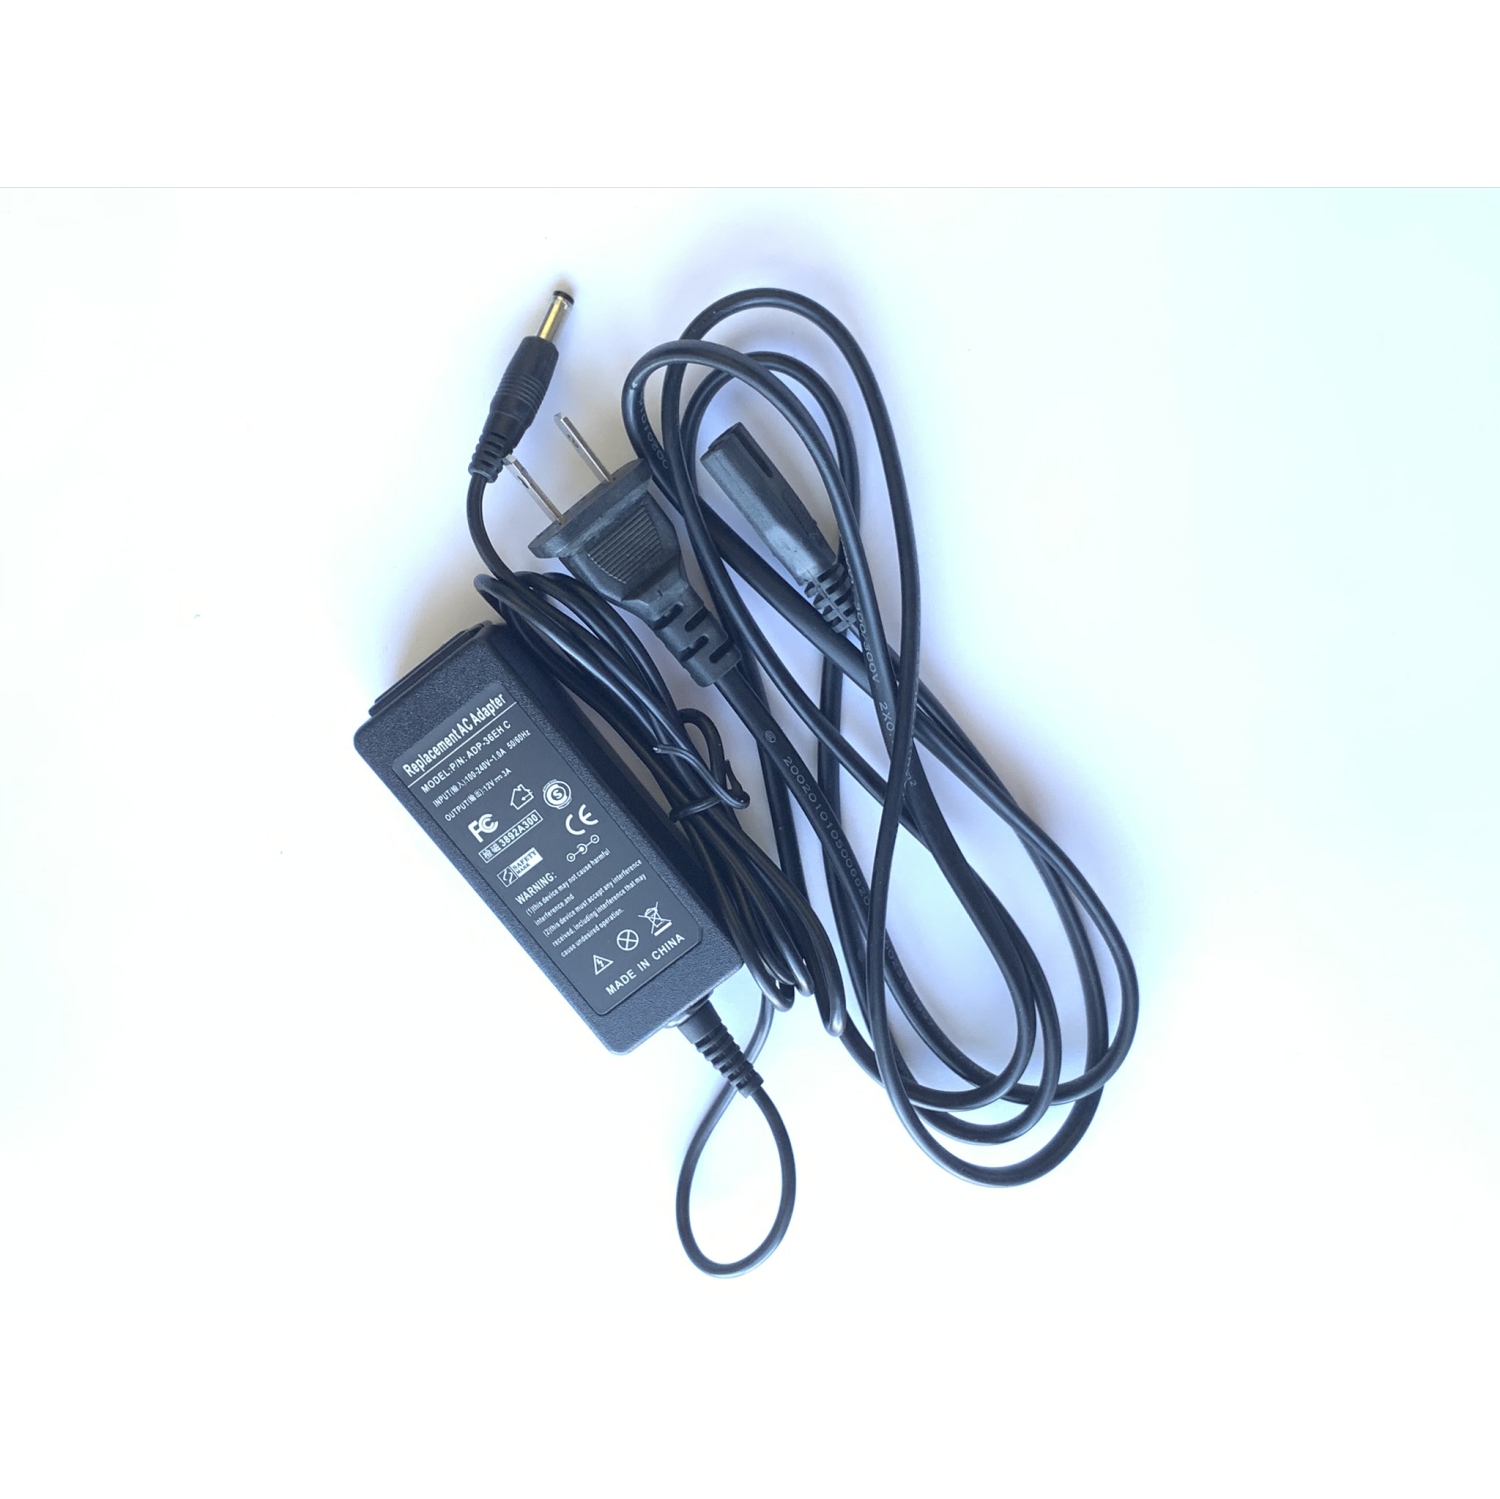 12V 3A 36W 4.8mm x 1.7mm AC adapter power cord charger for Asus Eee PC 1003HAG 901 GO R251T